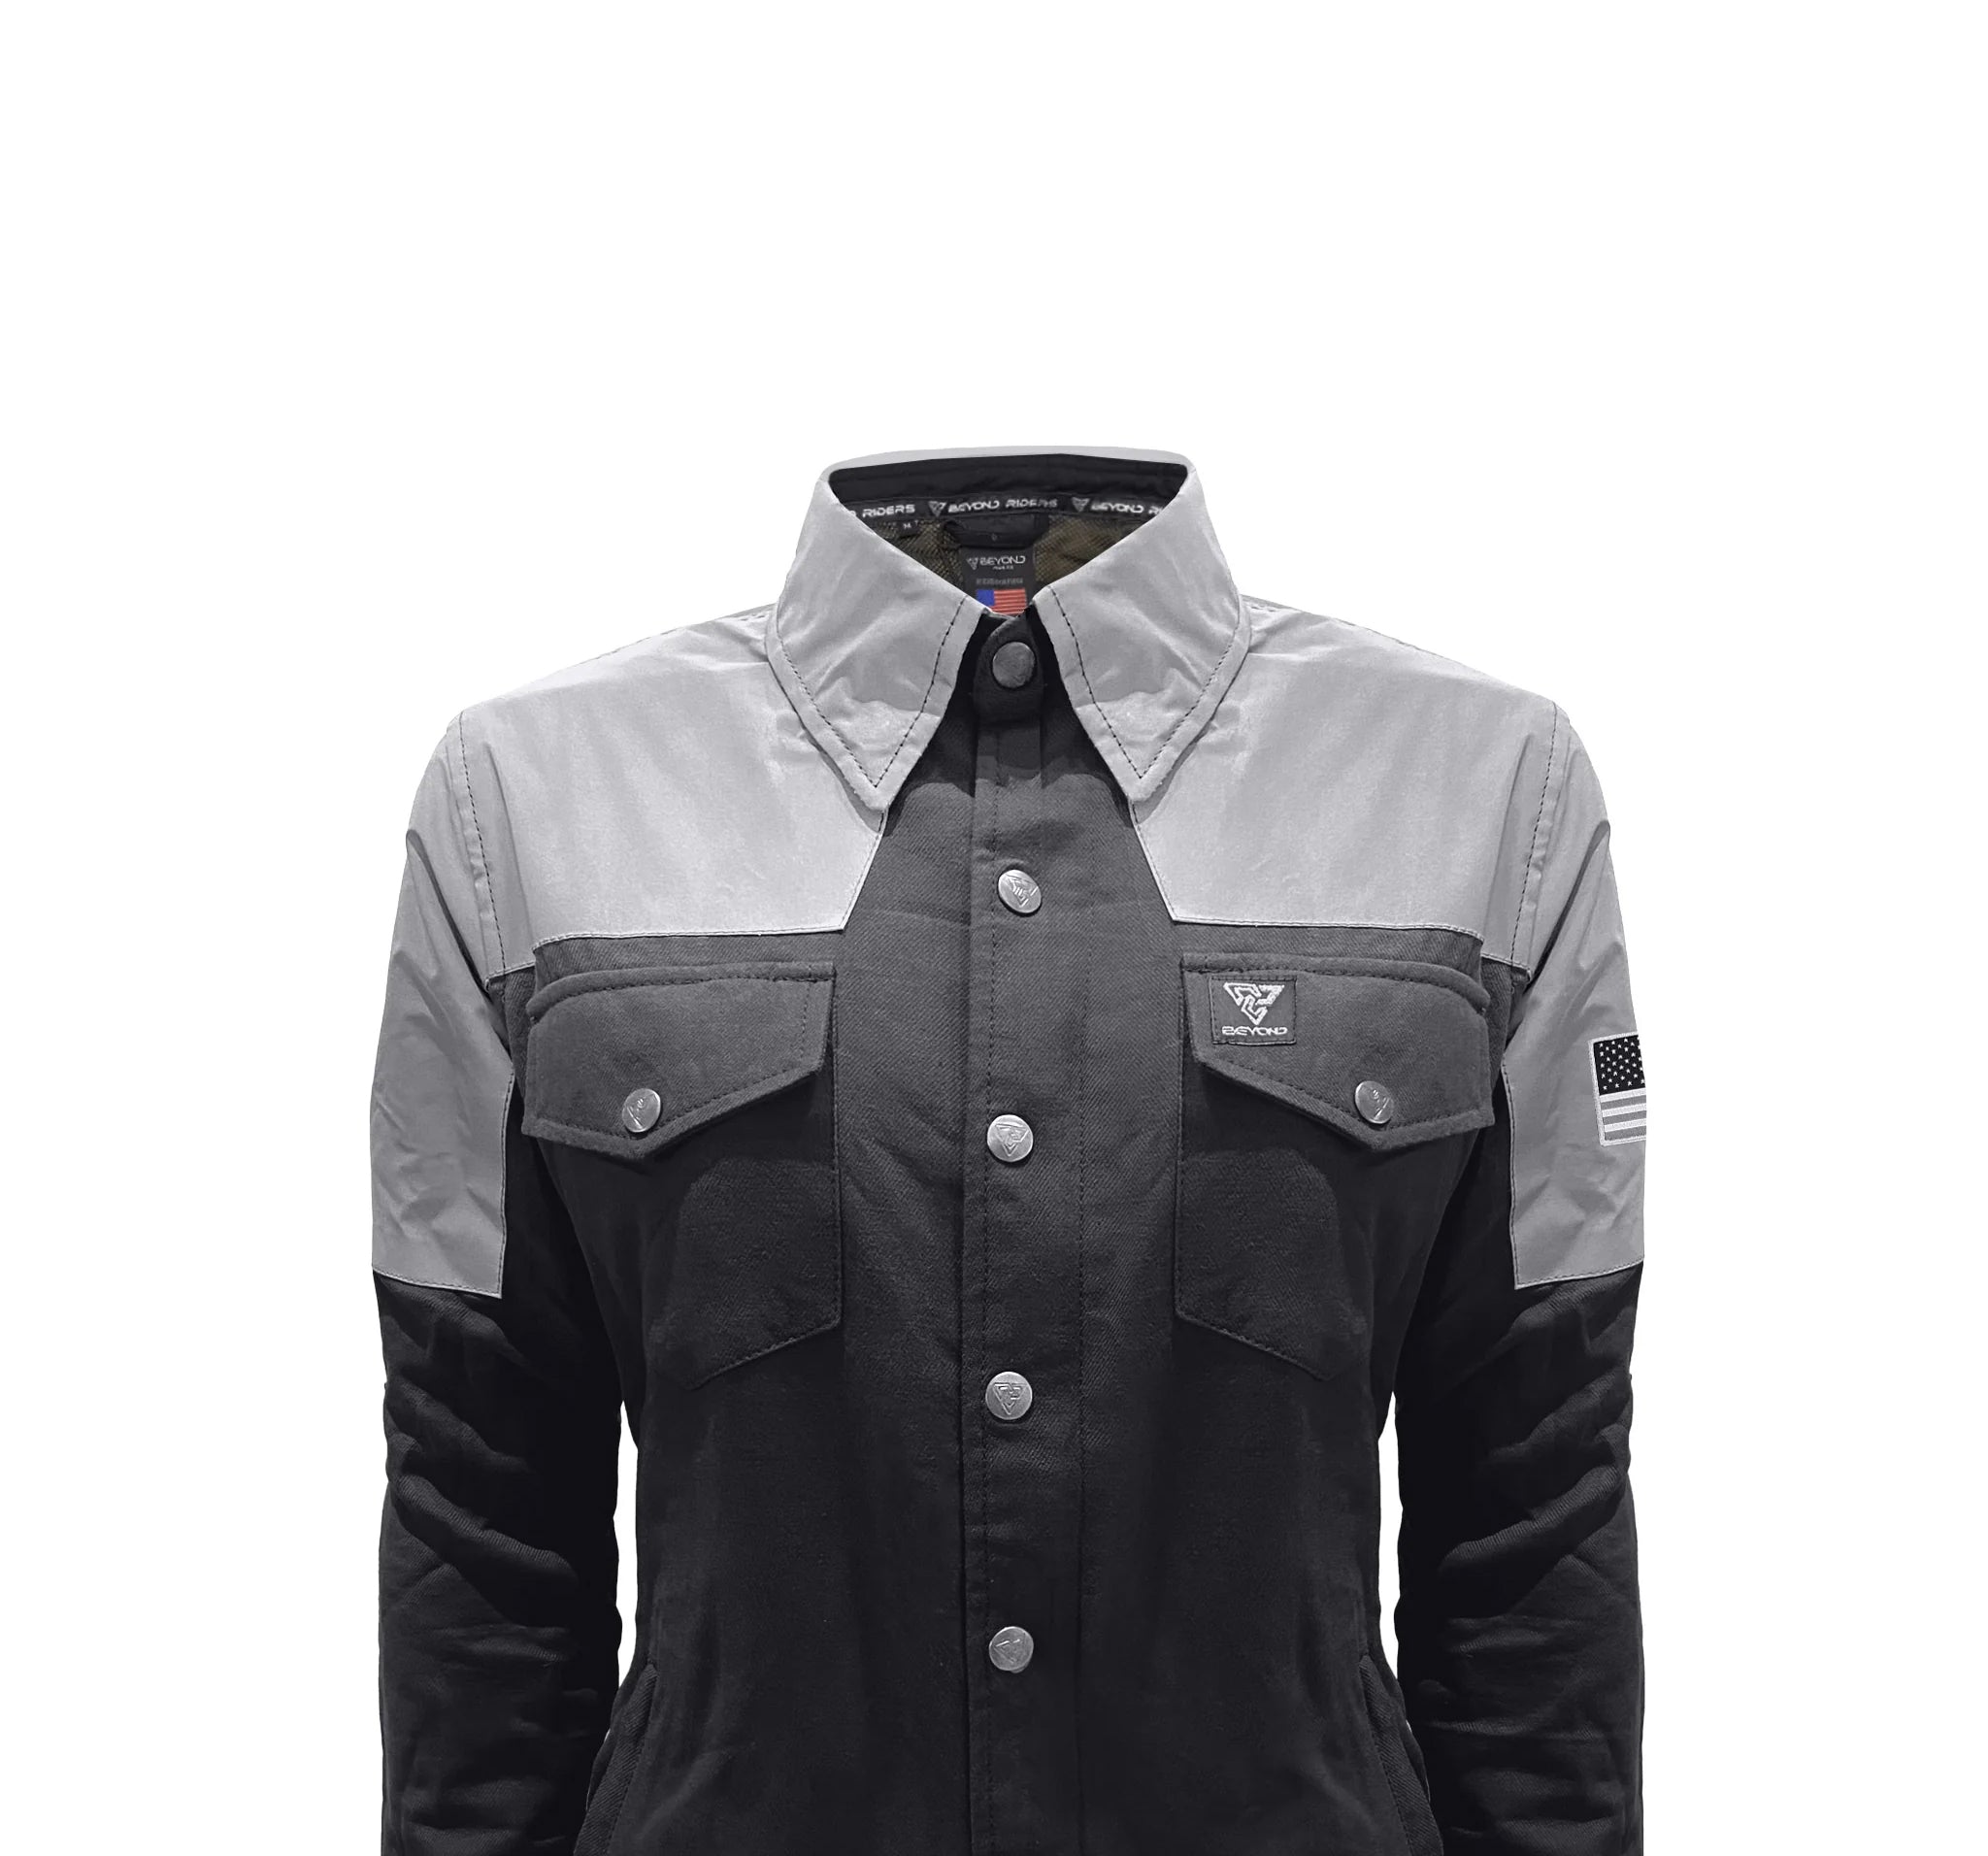 Flannel Reflective Shirts for Women